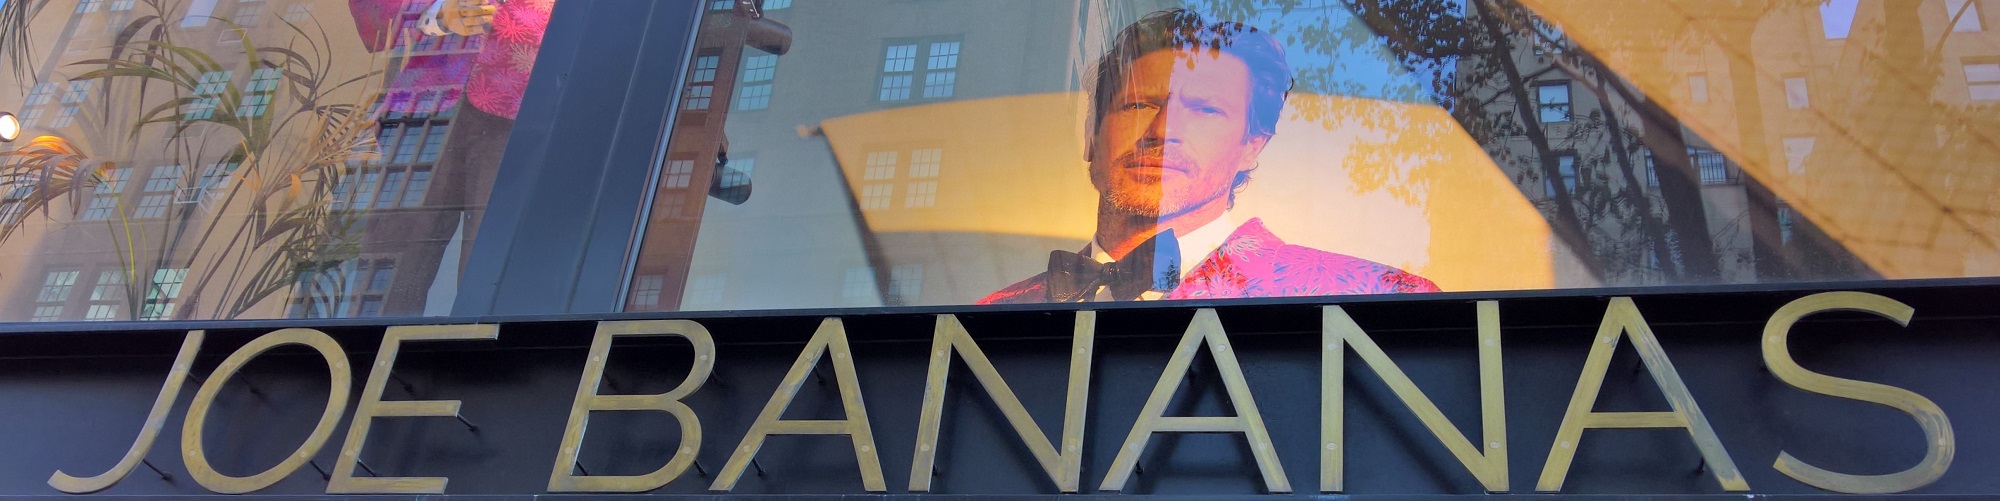 Aussie Businesses in NYC – and where to find them: Joe Bananas